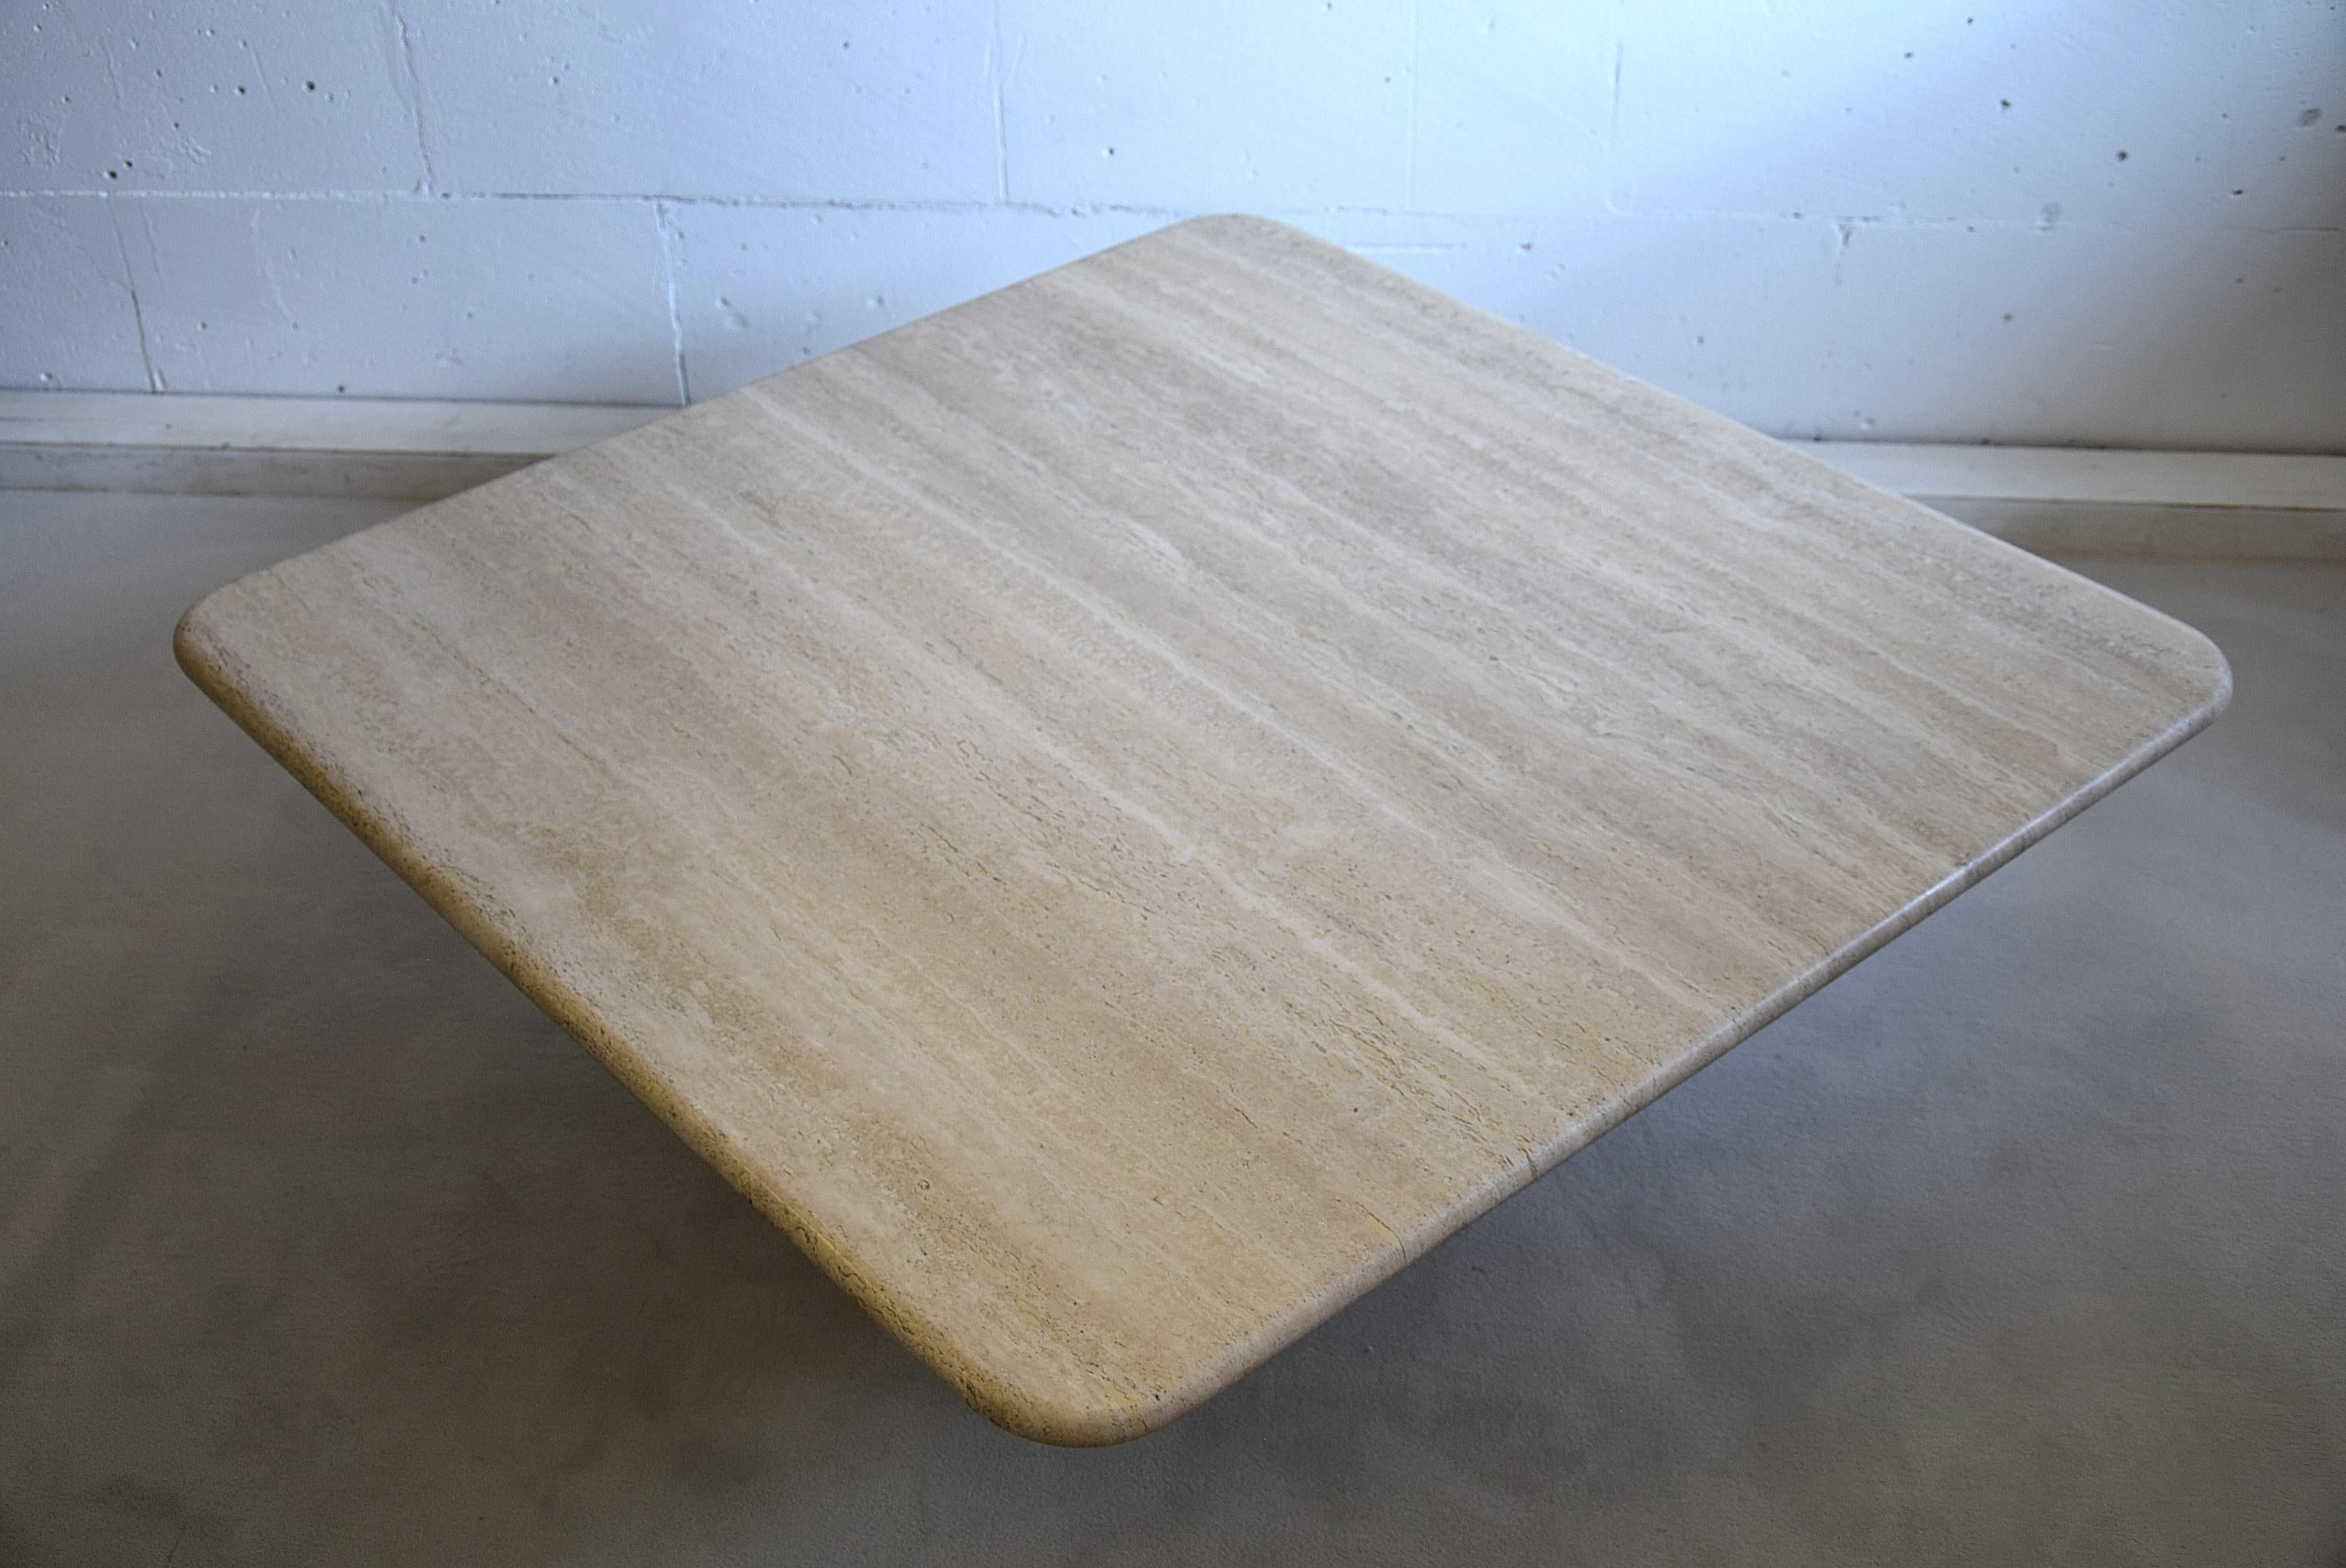 Mid-Century Modern Travertine side table in great condition. This elegant and sophisticated piece has no damage.
The table will be shipped abroad in a custom made wooden crate. Cost of transport to the US crate included is Euro 1450.
Travertine is a